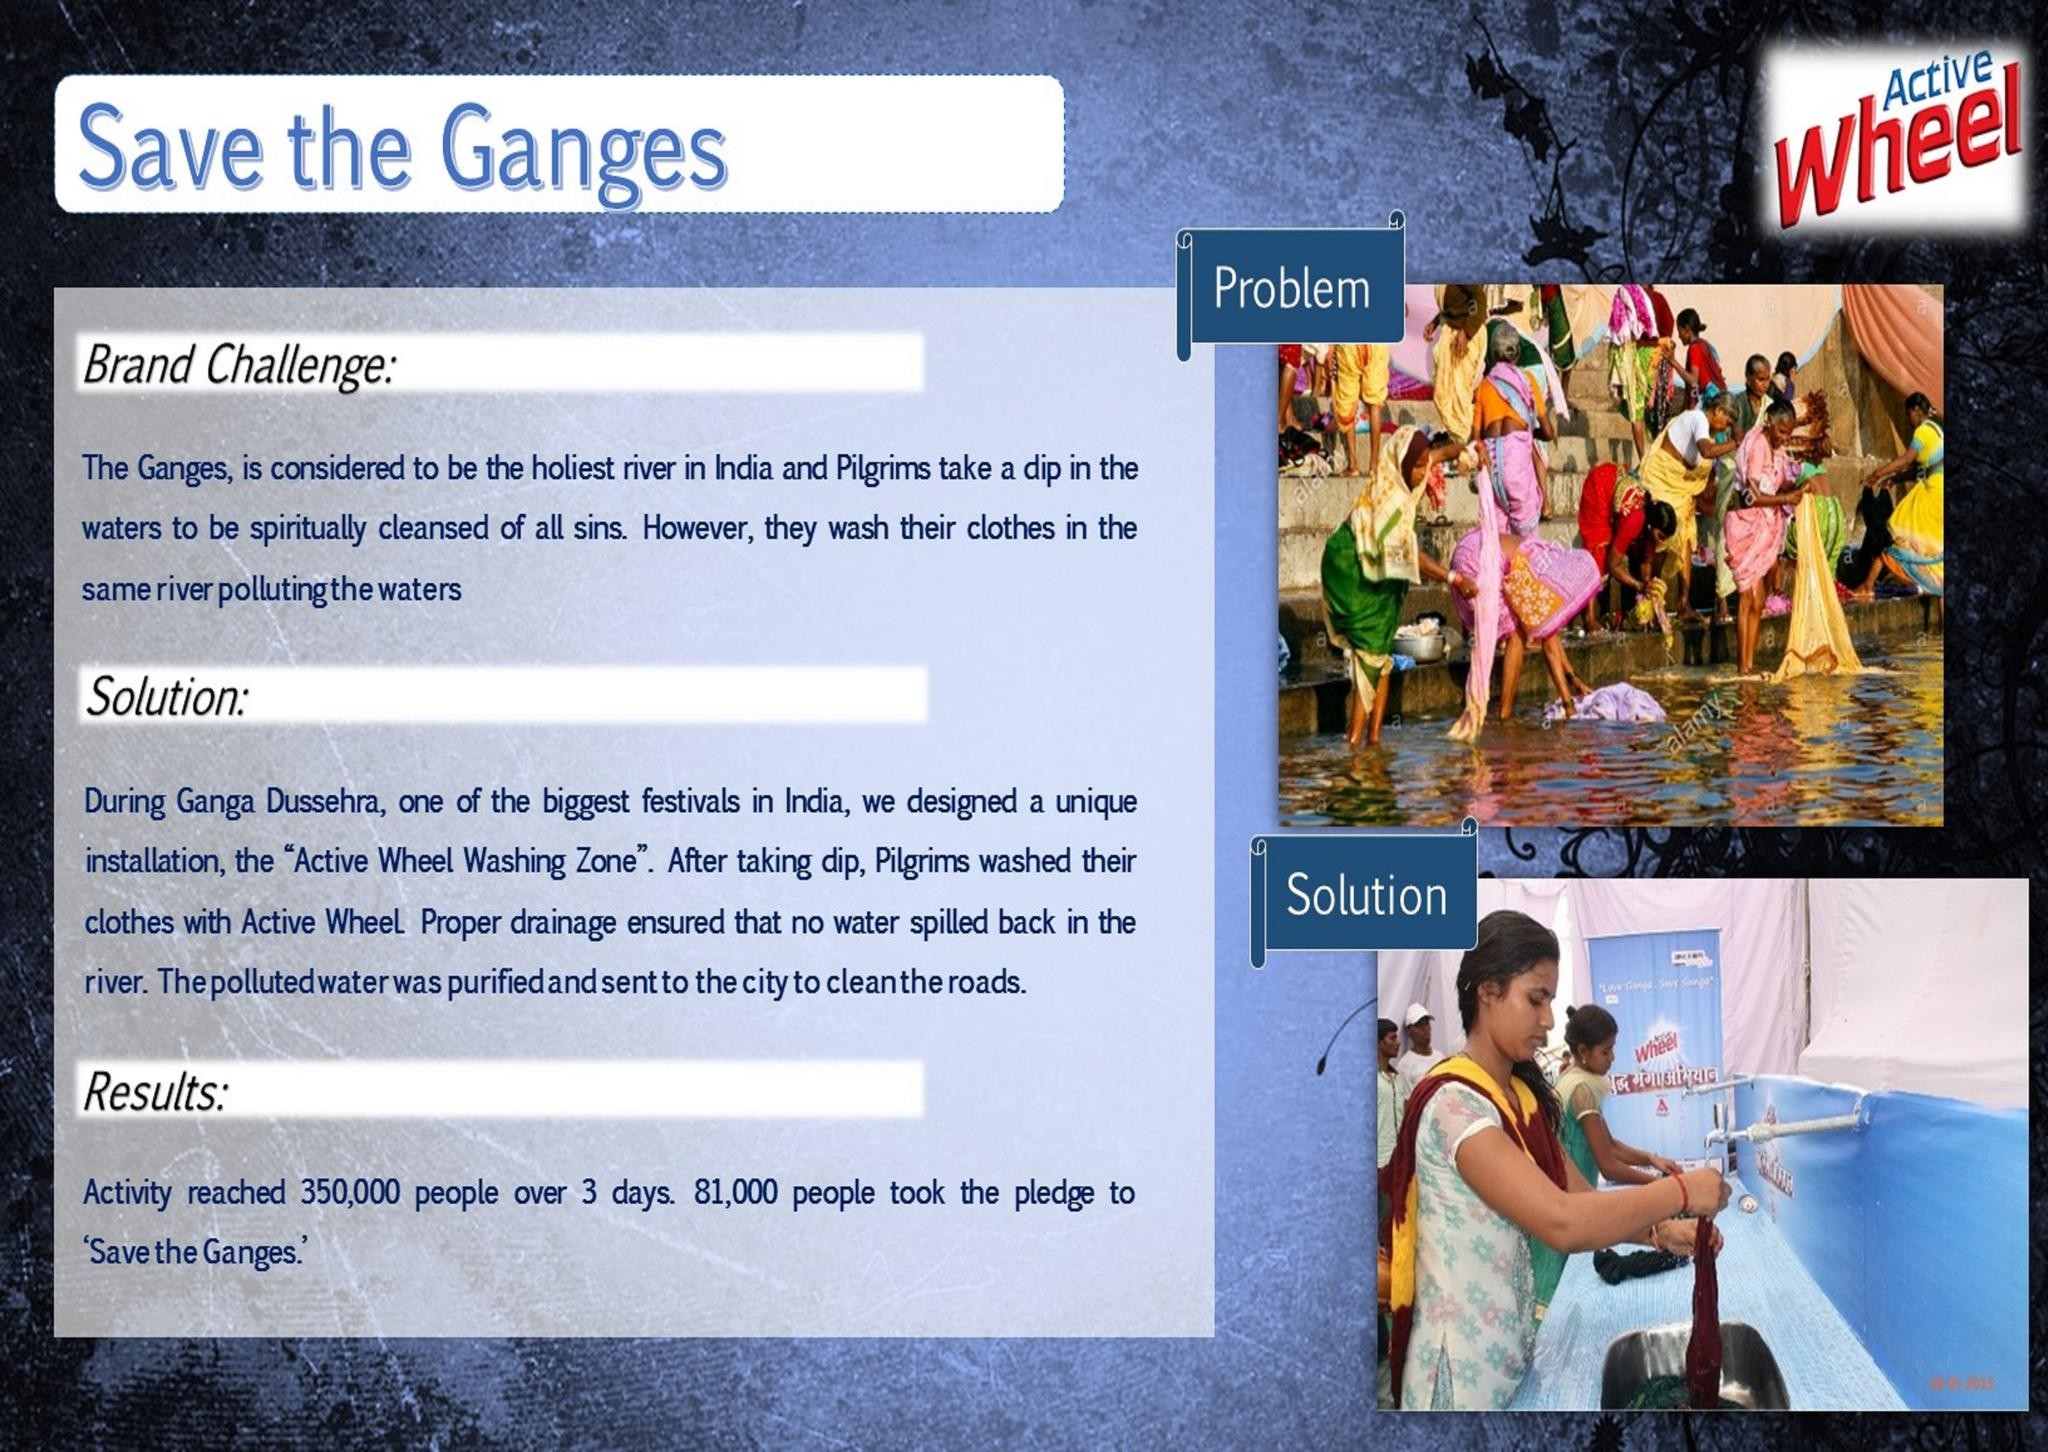 Active Wheel - Save the Ganges